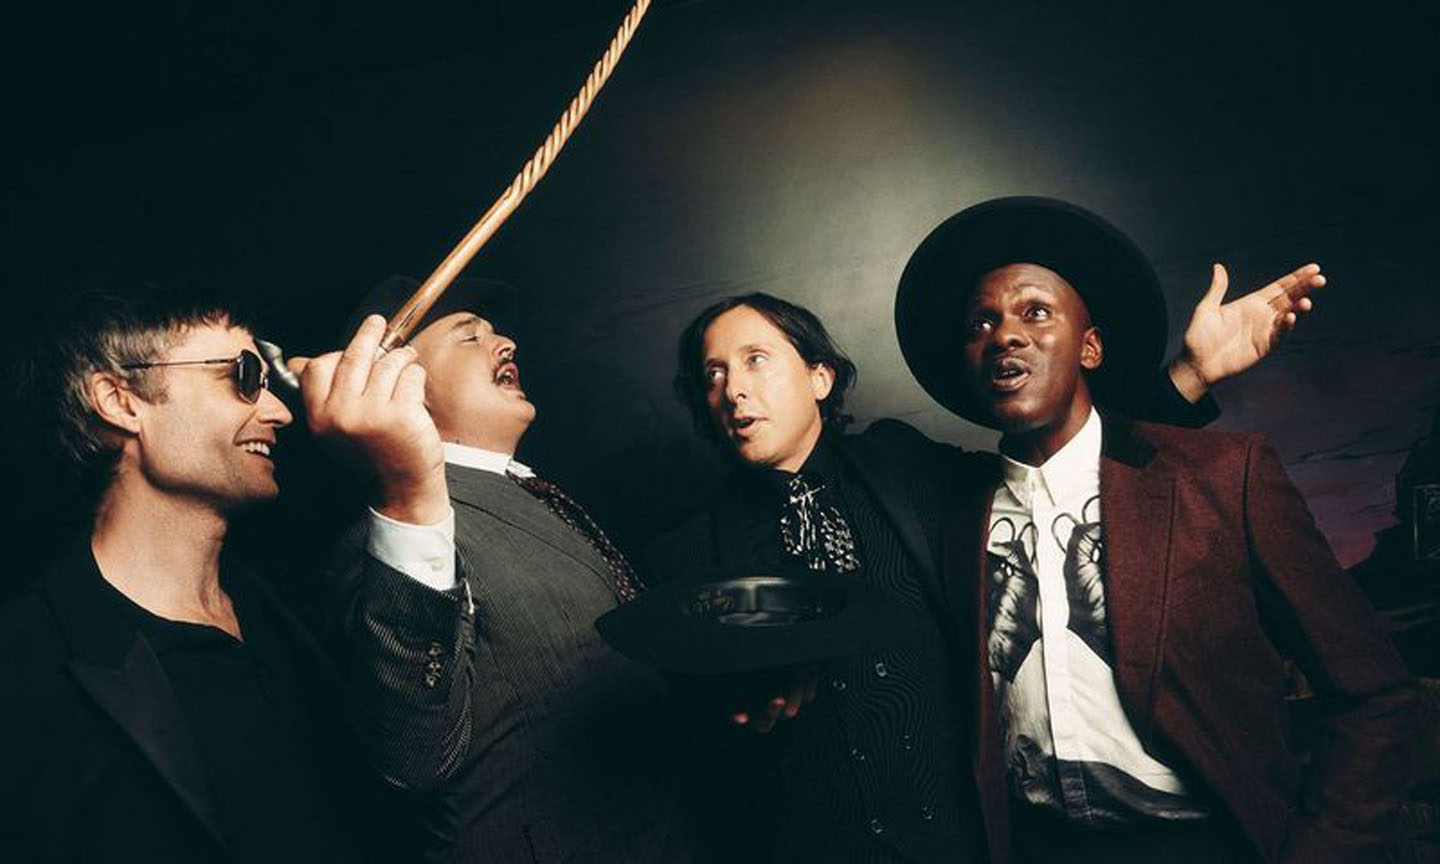 The Libertines’ New Album ‘All Quiet On The Eastern Esplanade’ Is Out Now